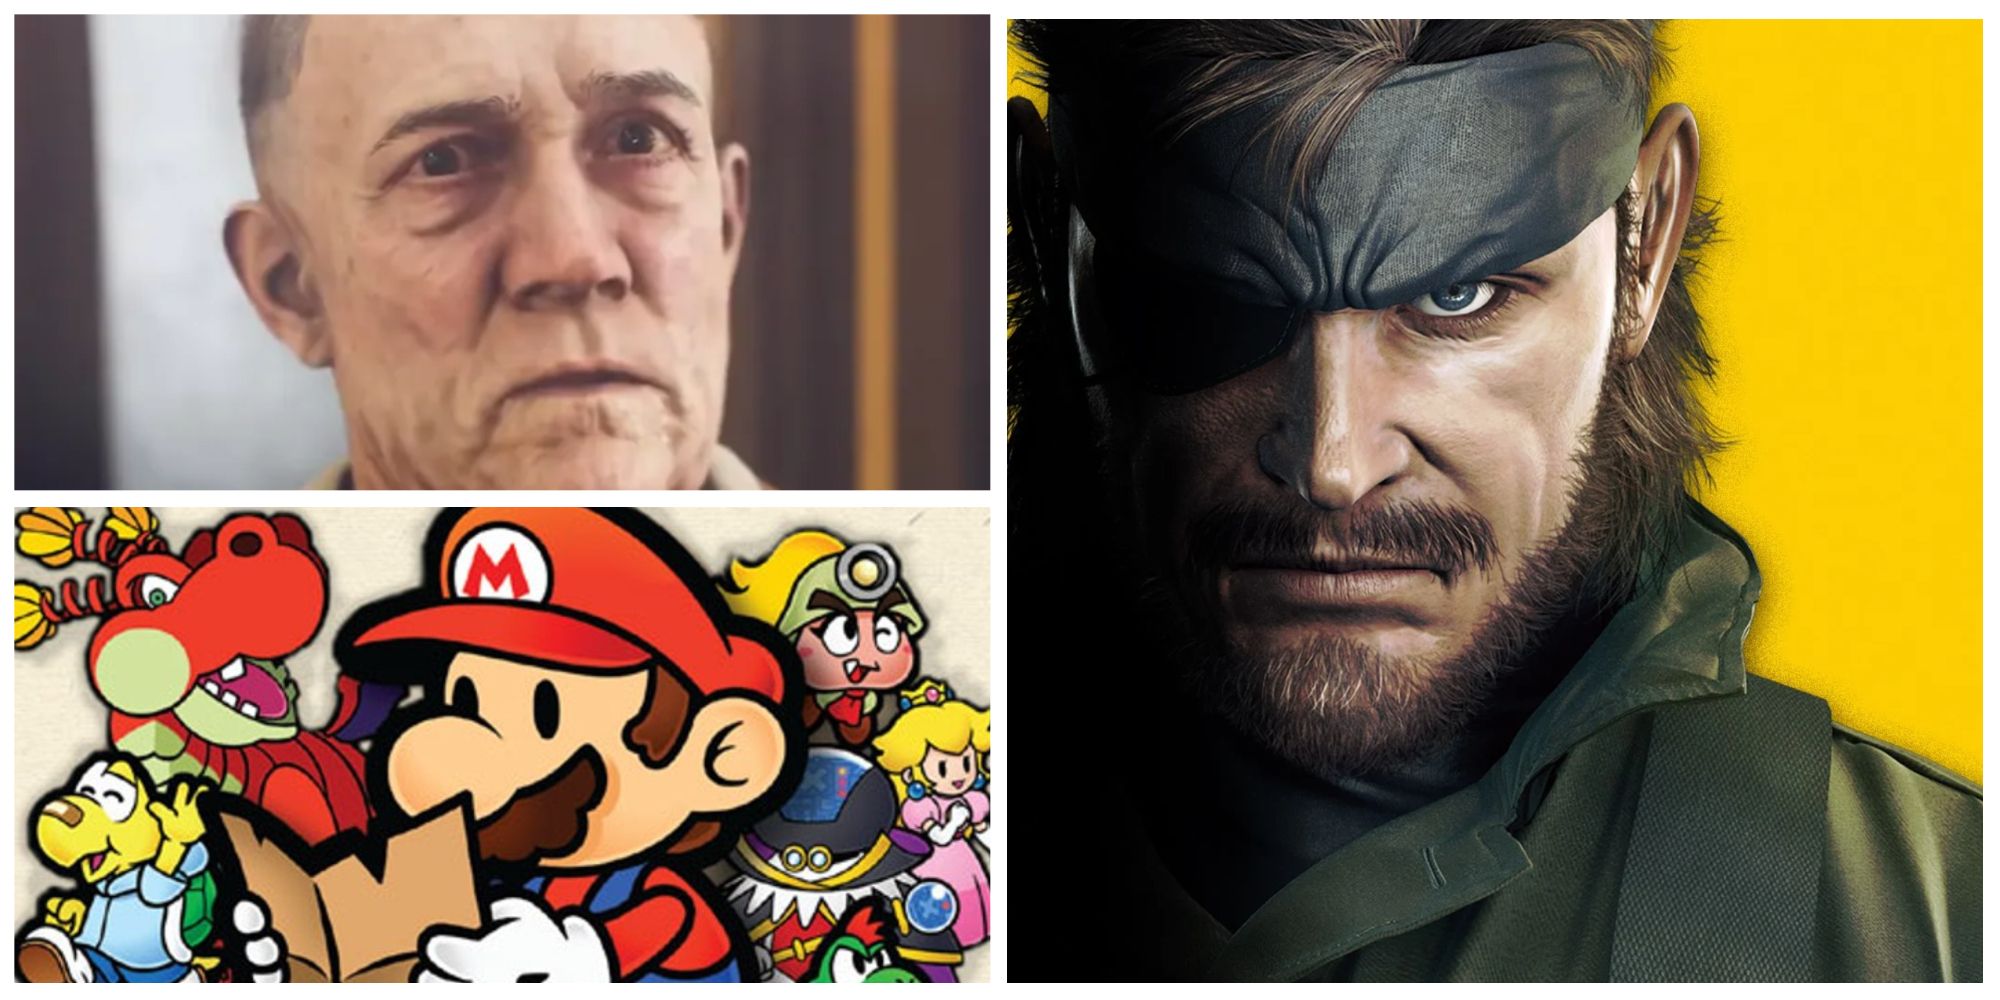 pictures from wolfenstein, paper mario and metal gear in a photo collage